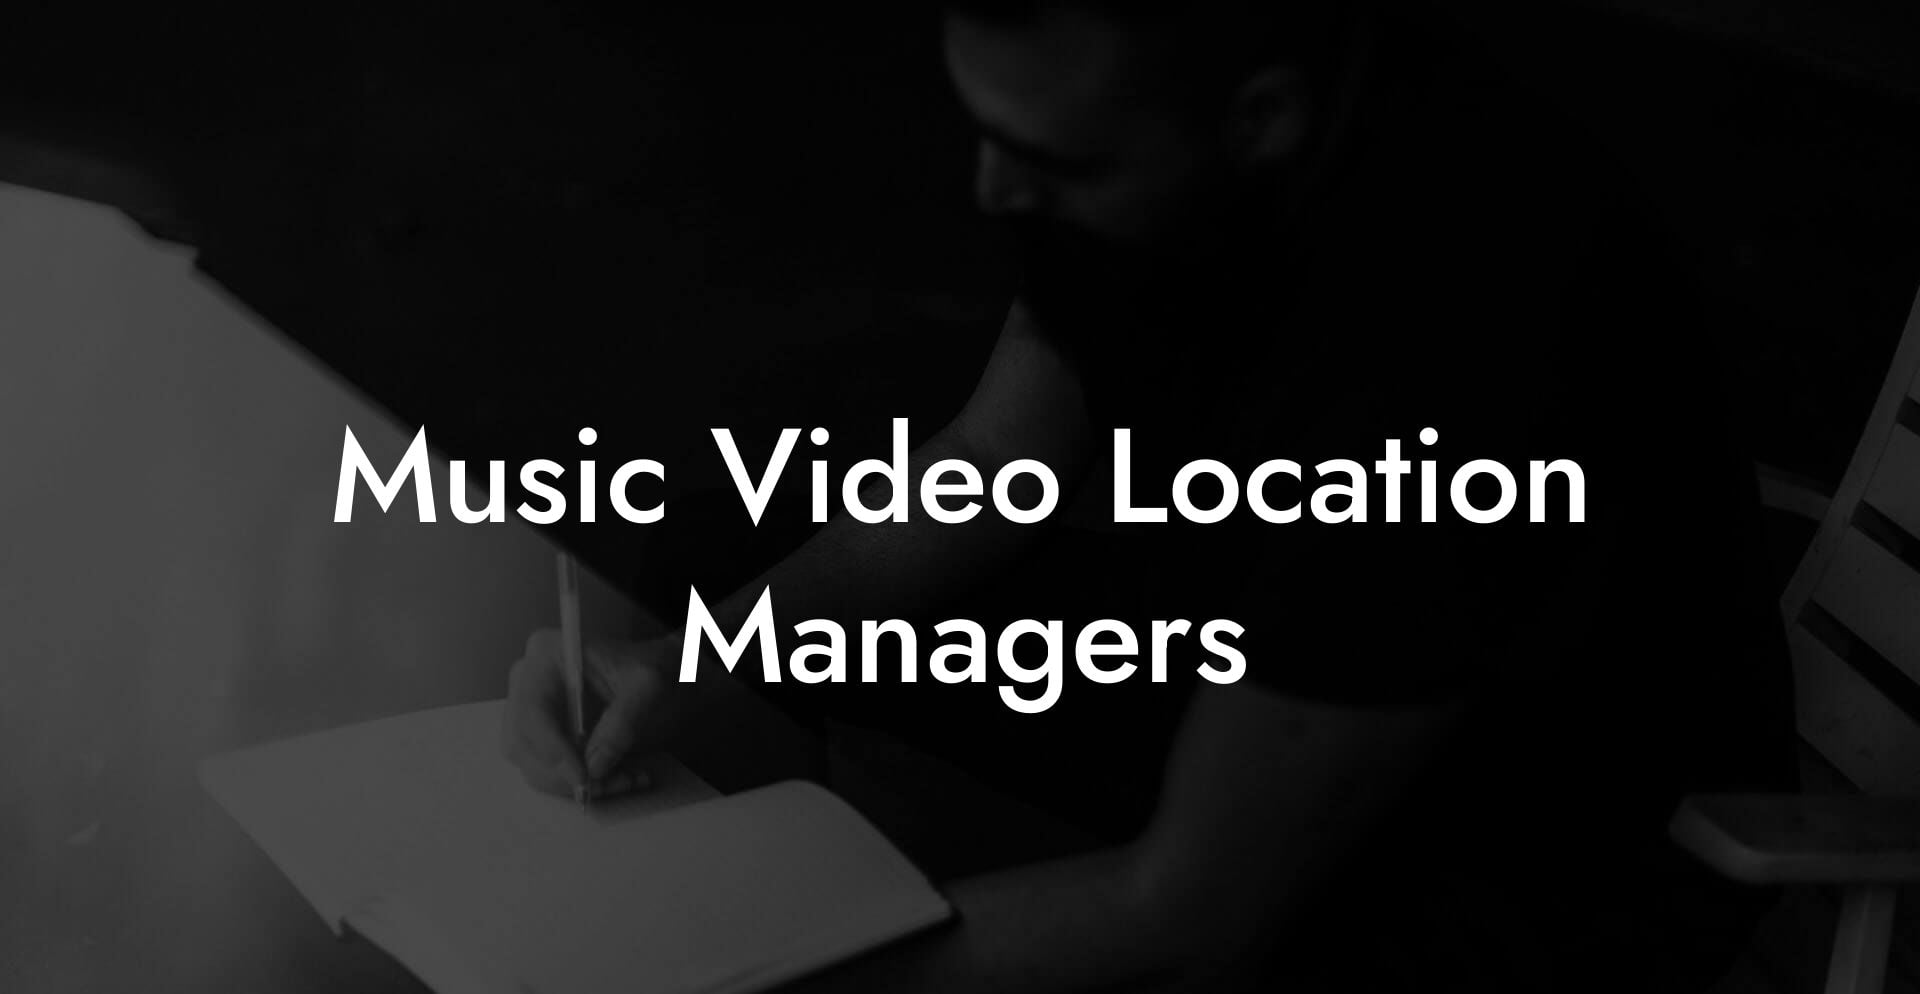 Music Video Location Managers